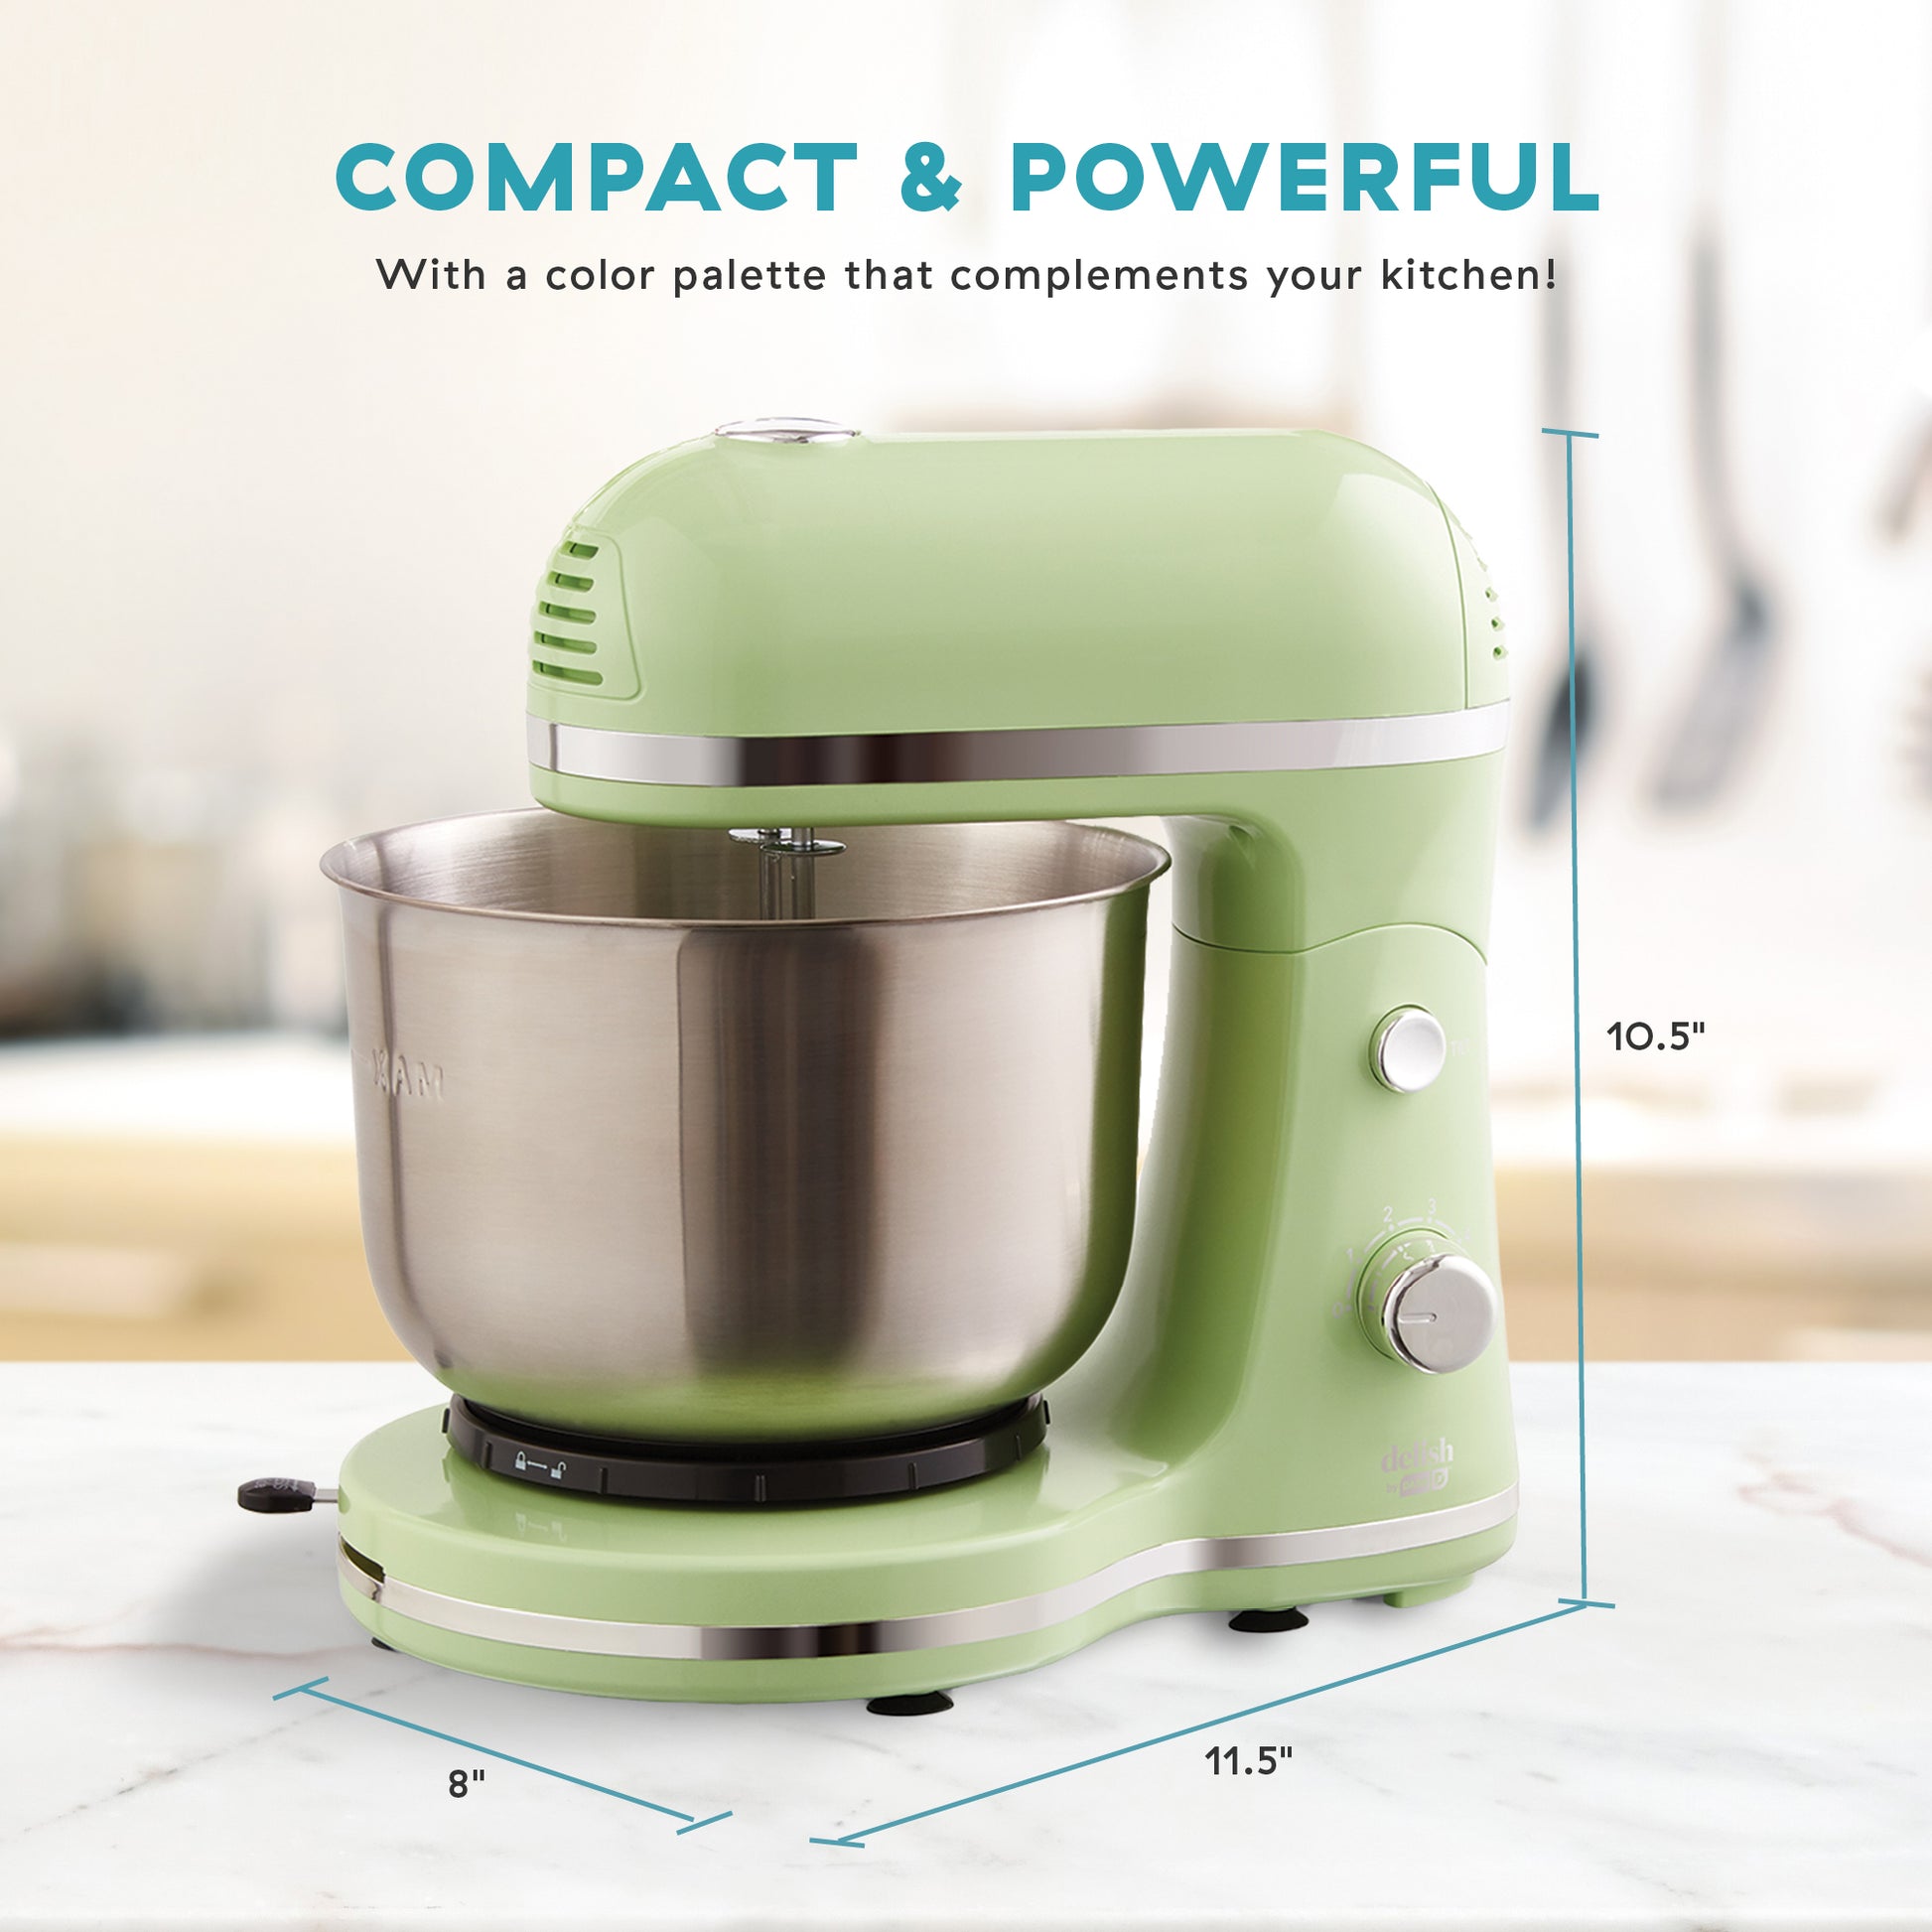 You need to get KitchenAid's mini 3.5-quart stand mixer while it's